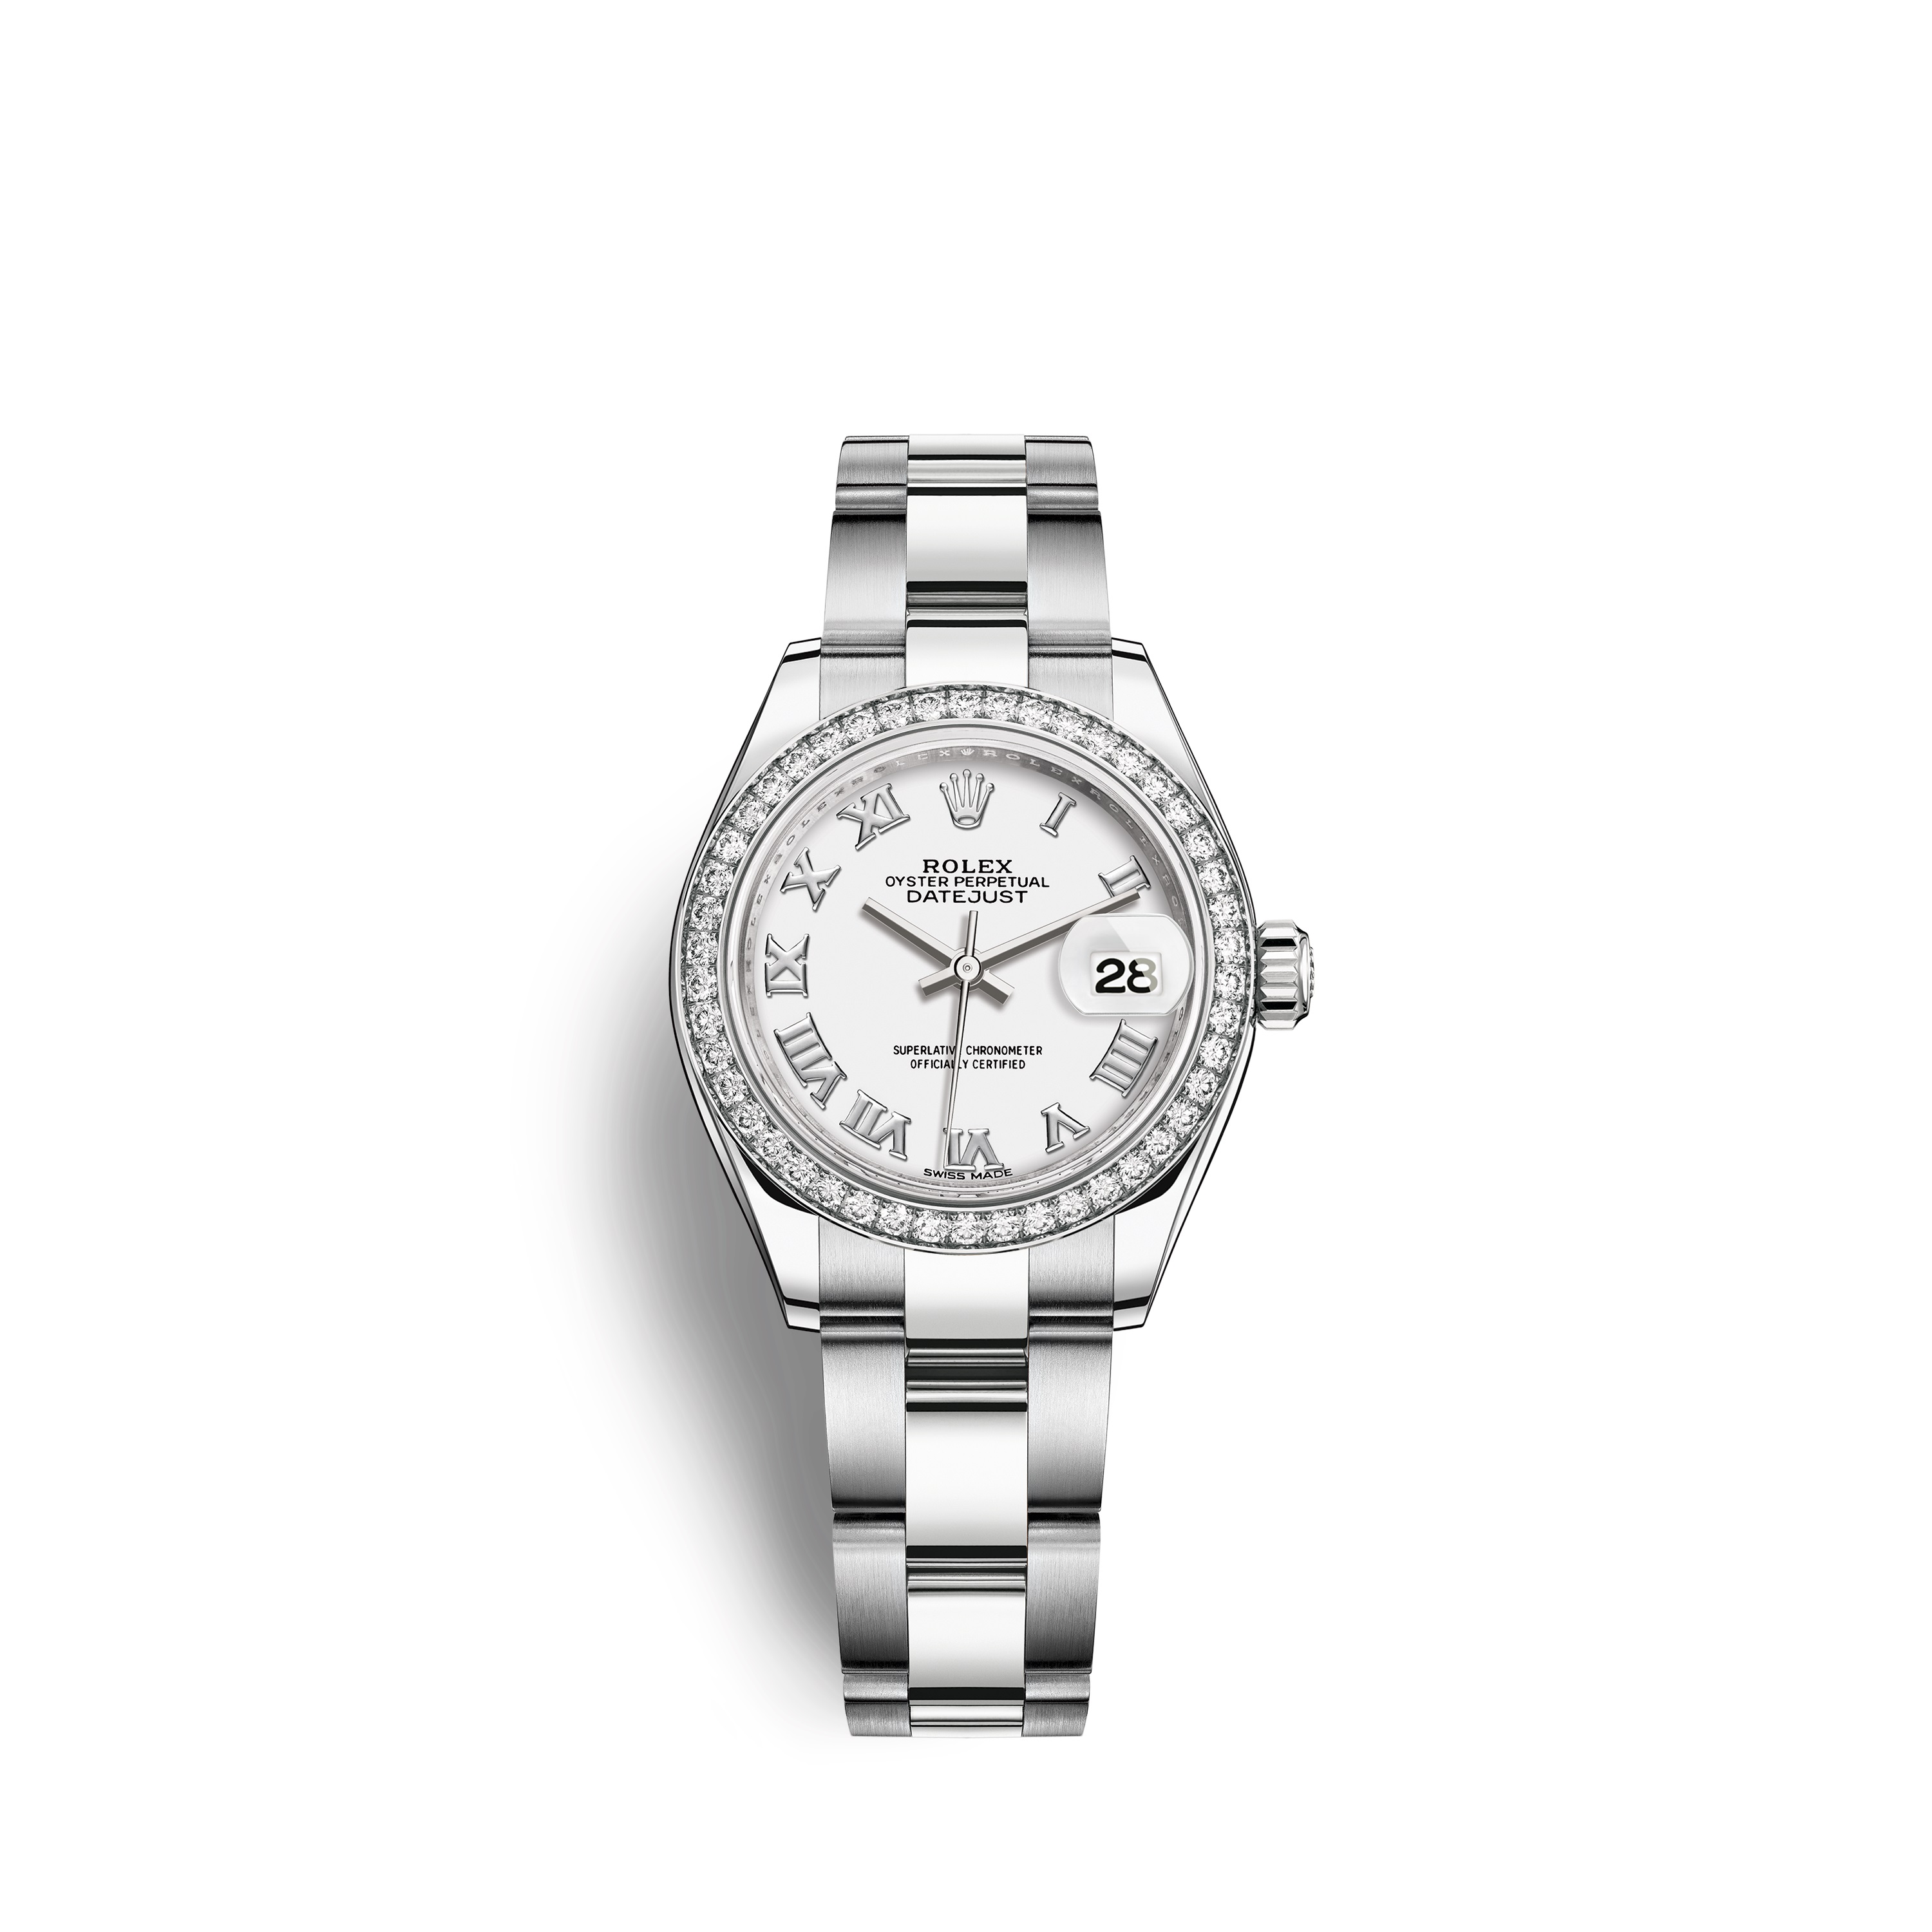 Lady-Datejust 28 279384RBR White Gold & Stainless Steel Watch (White)